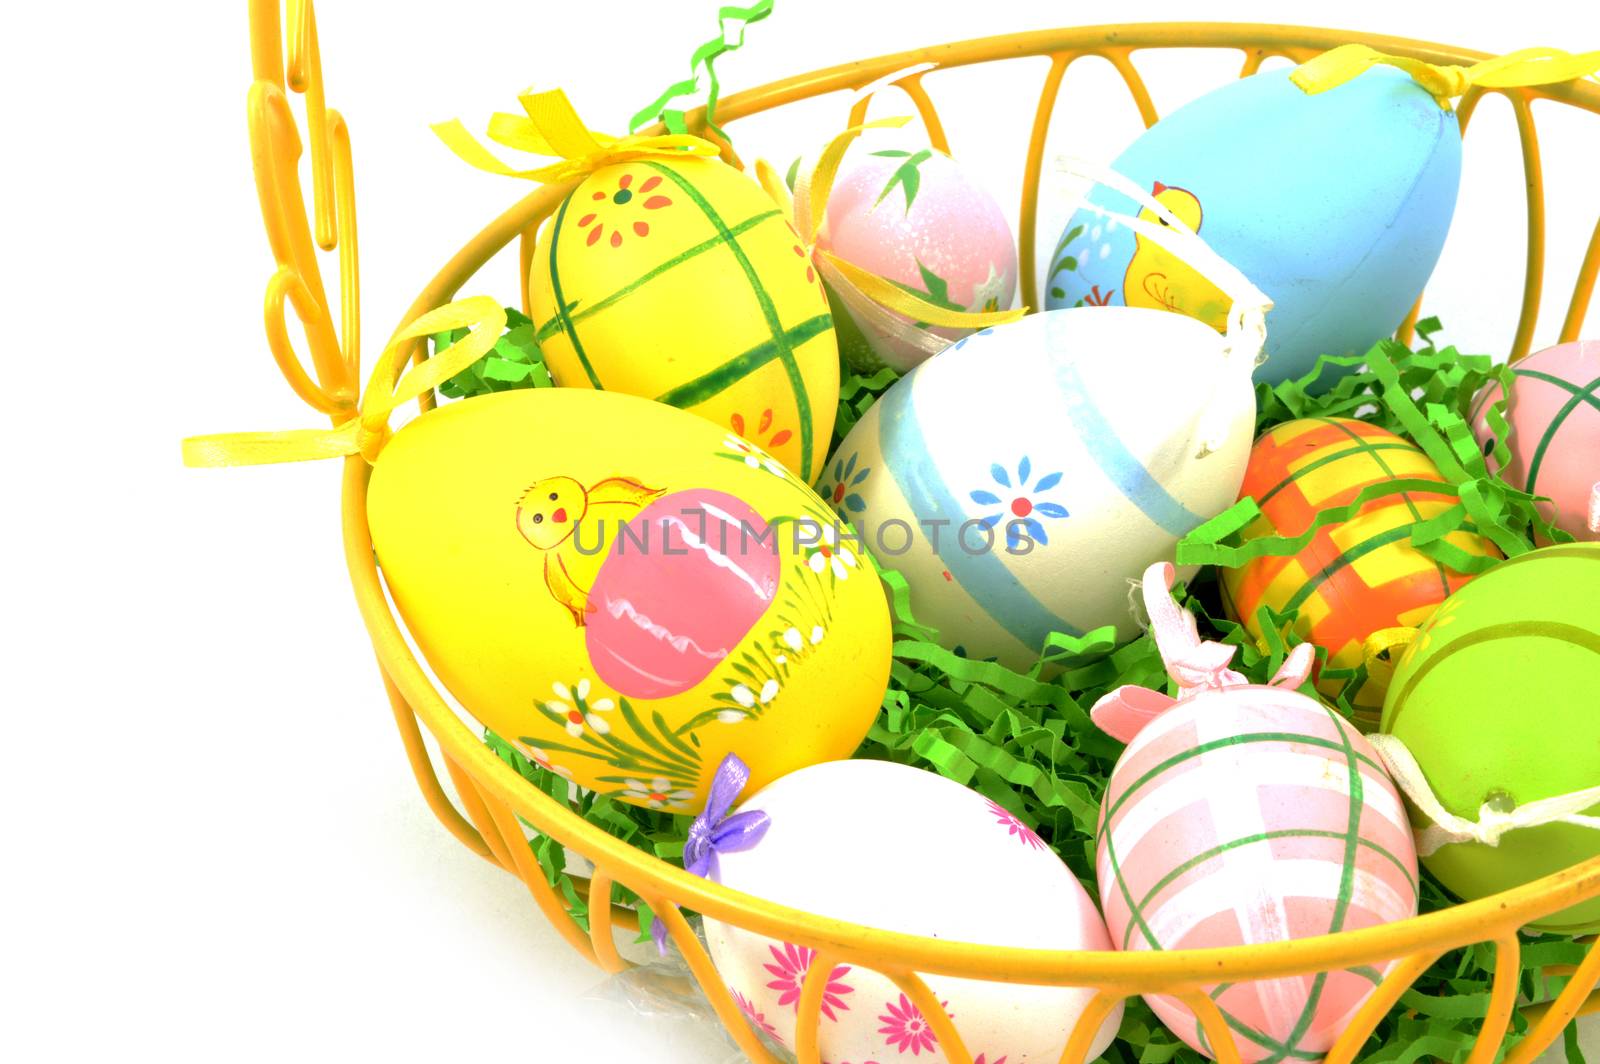 A closeup view of an Easter basket full of painted eggs for the holiday season.